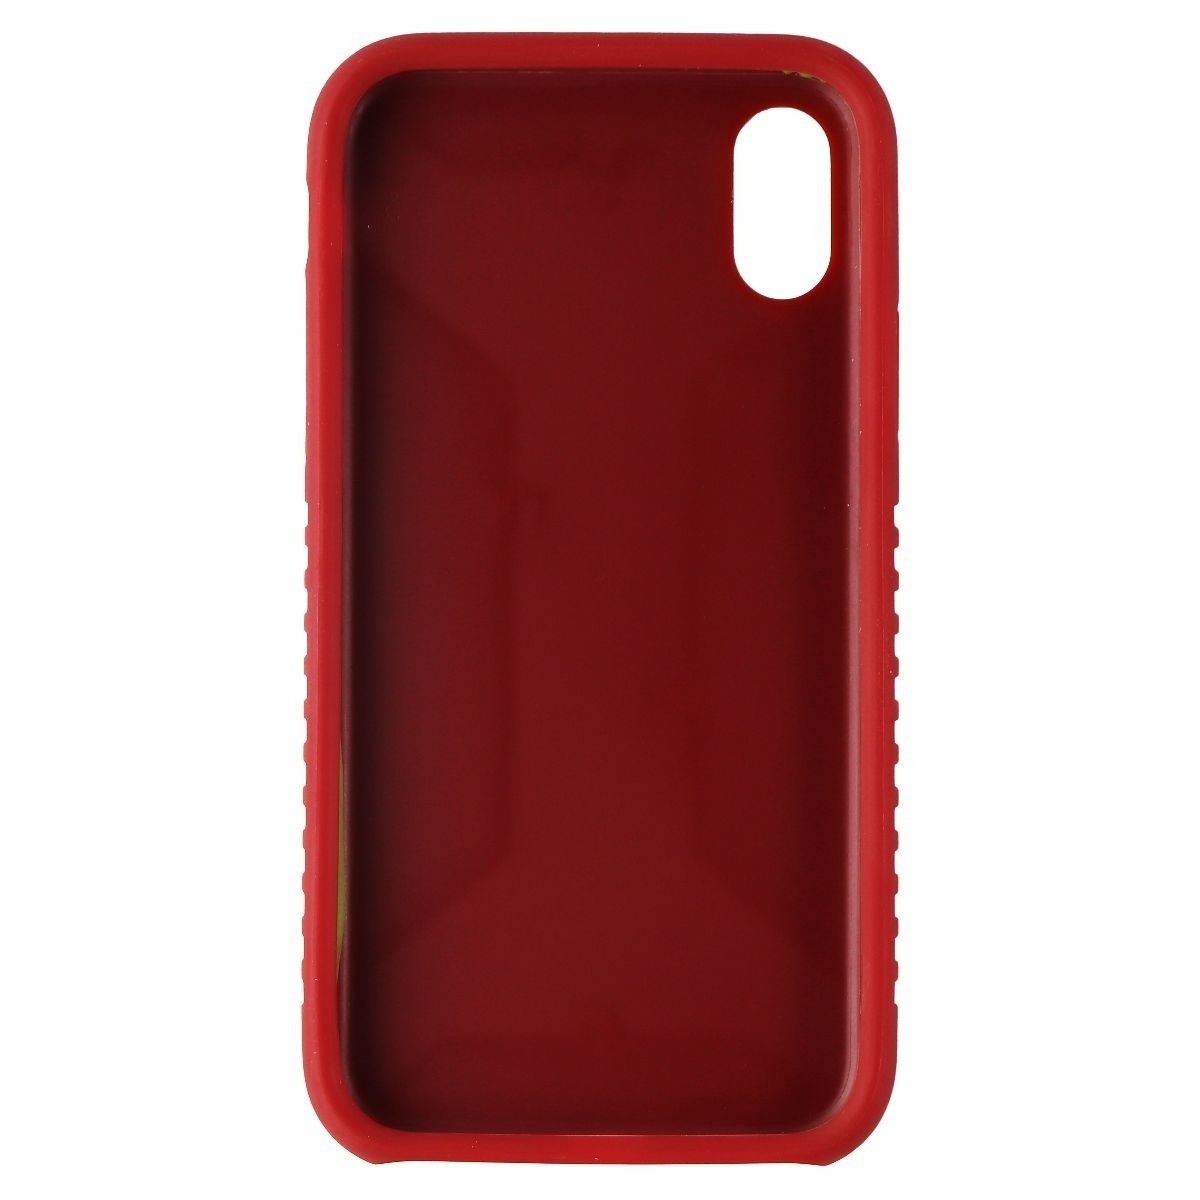 ImpactGel Warrior Series Case For Apple IPhone Xs/X - Red/Black